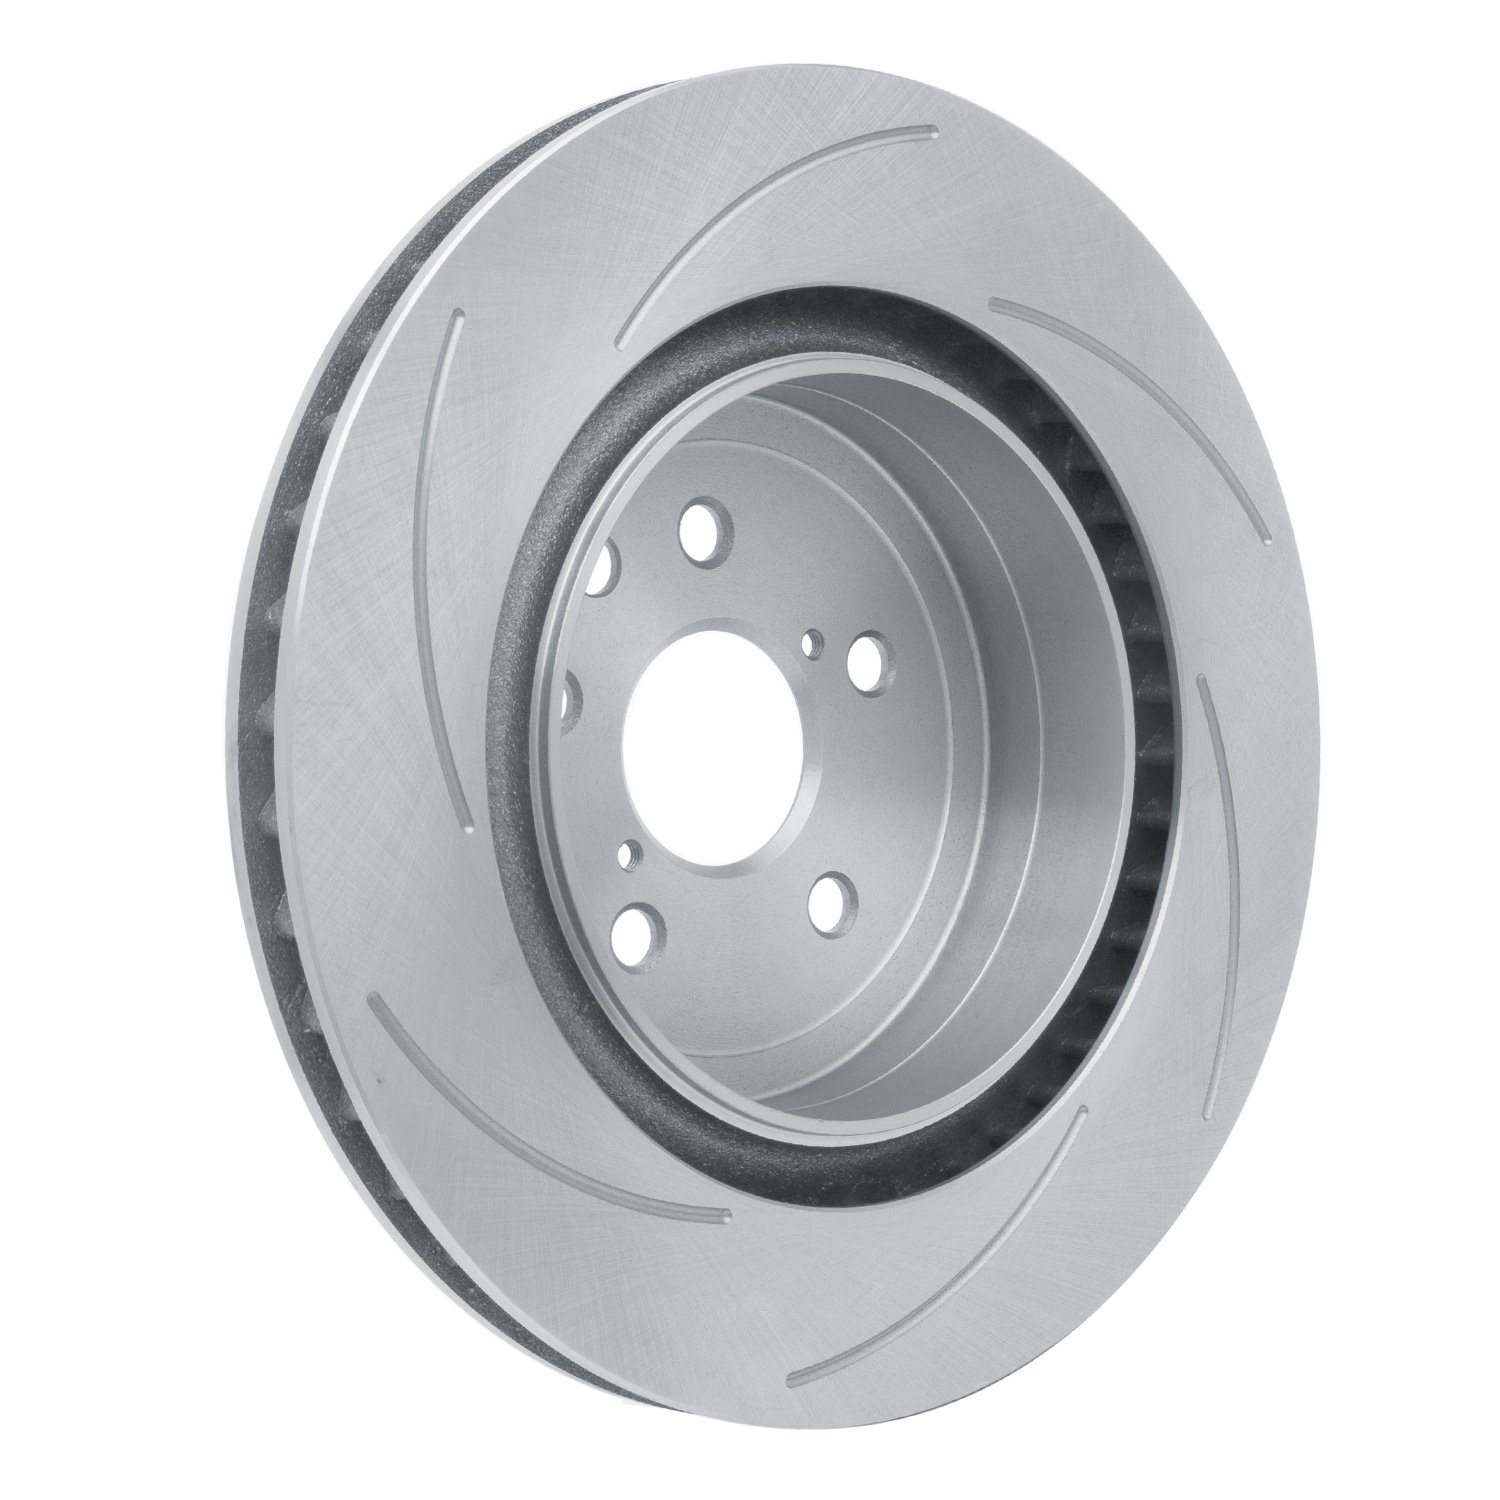 Slotted Brake Rotor, Fits Select Lexus/Toyota/Scion